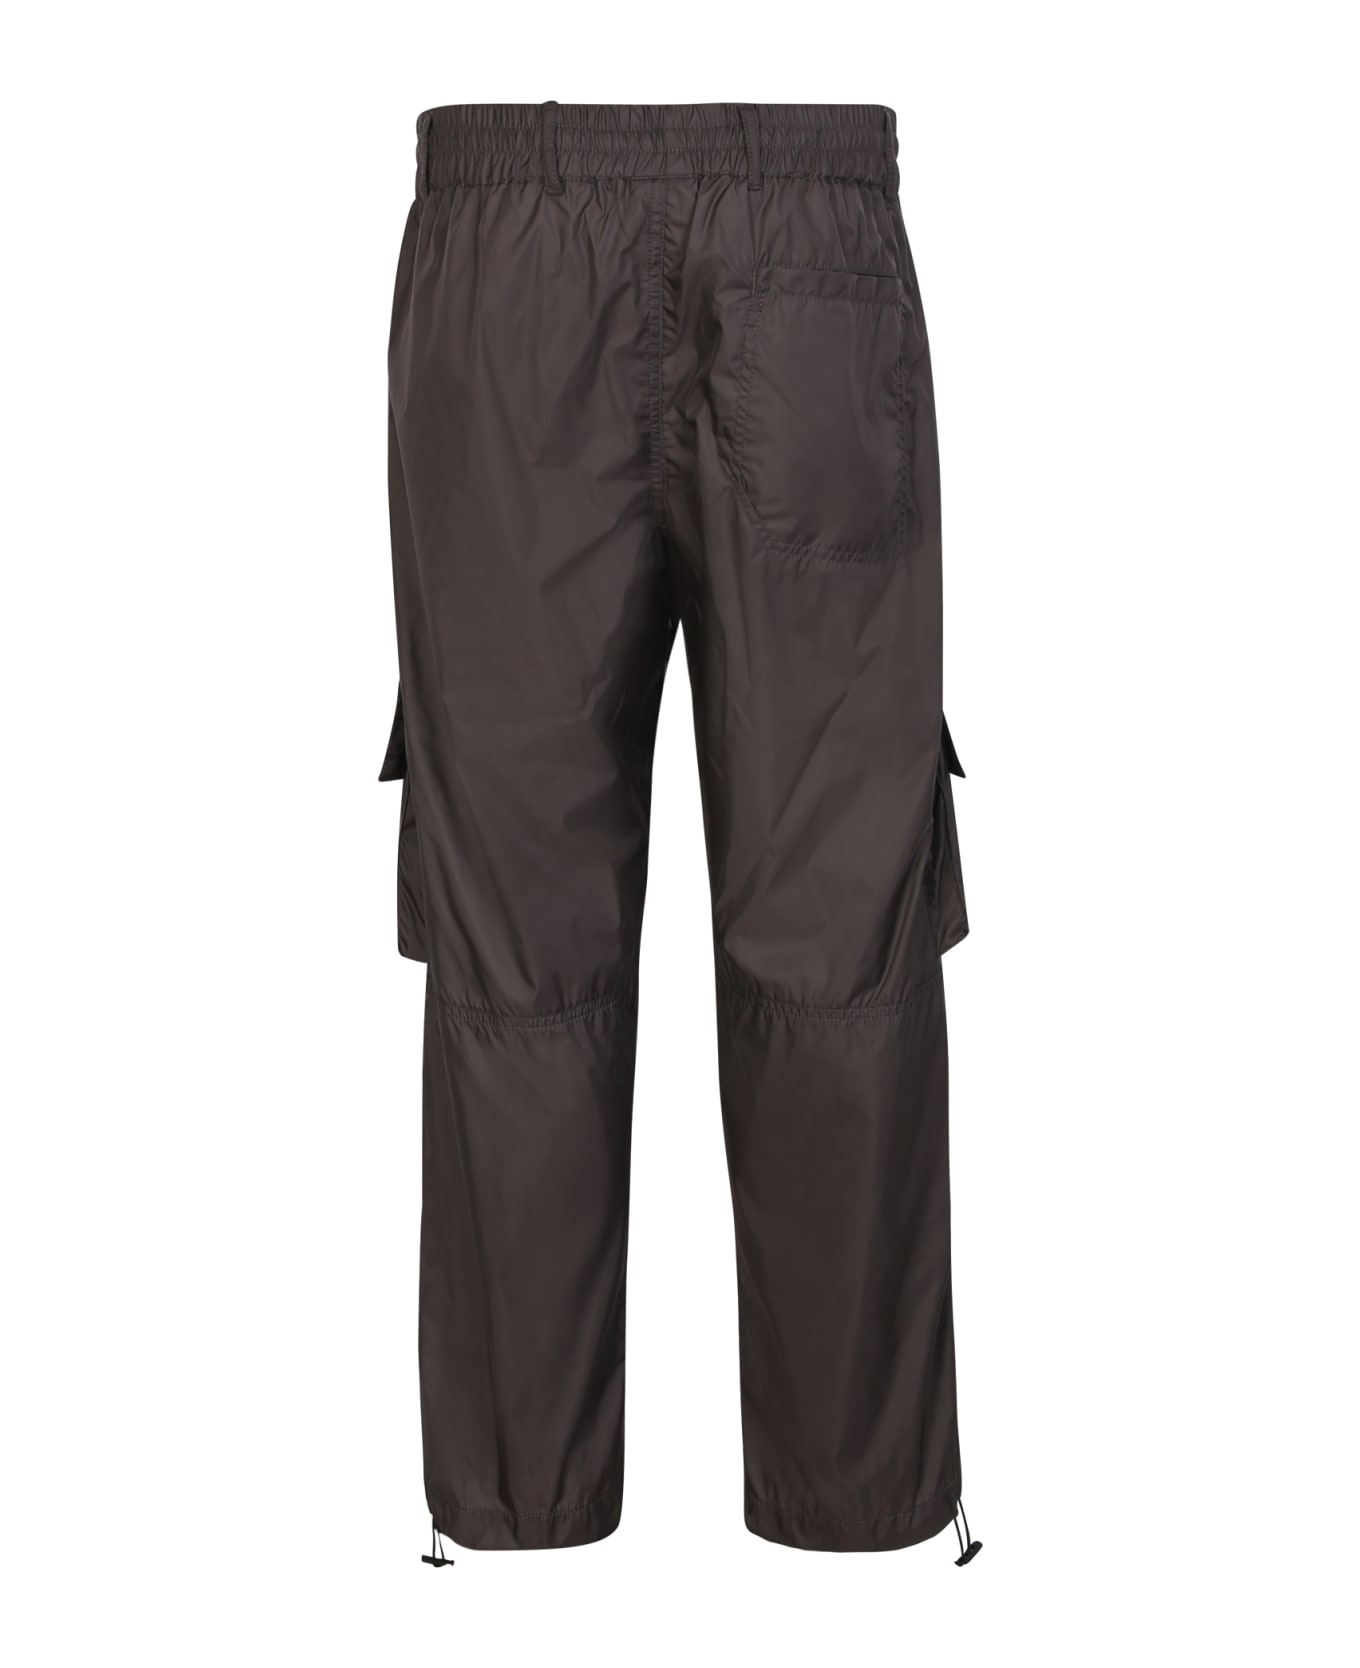 44 Label Group Cargo Trousers - Brown